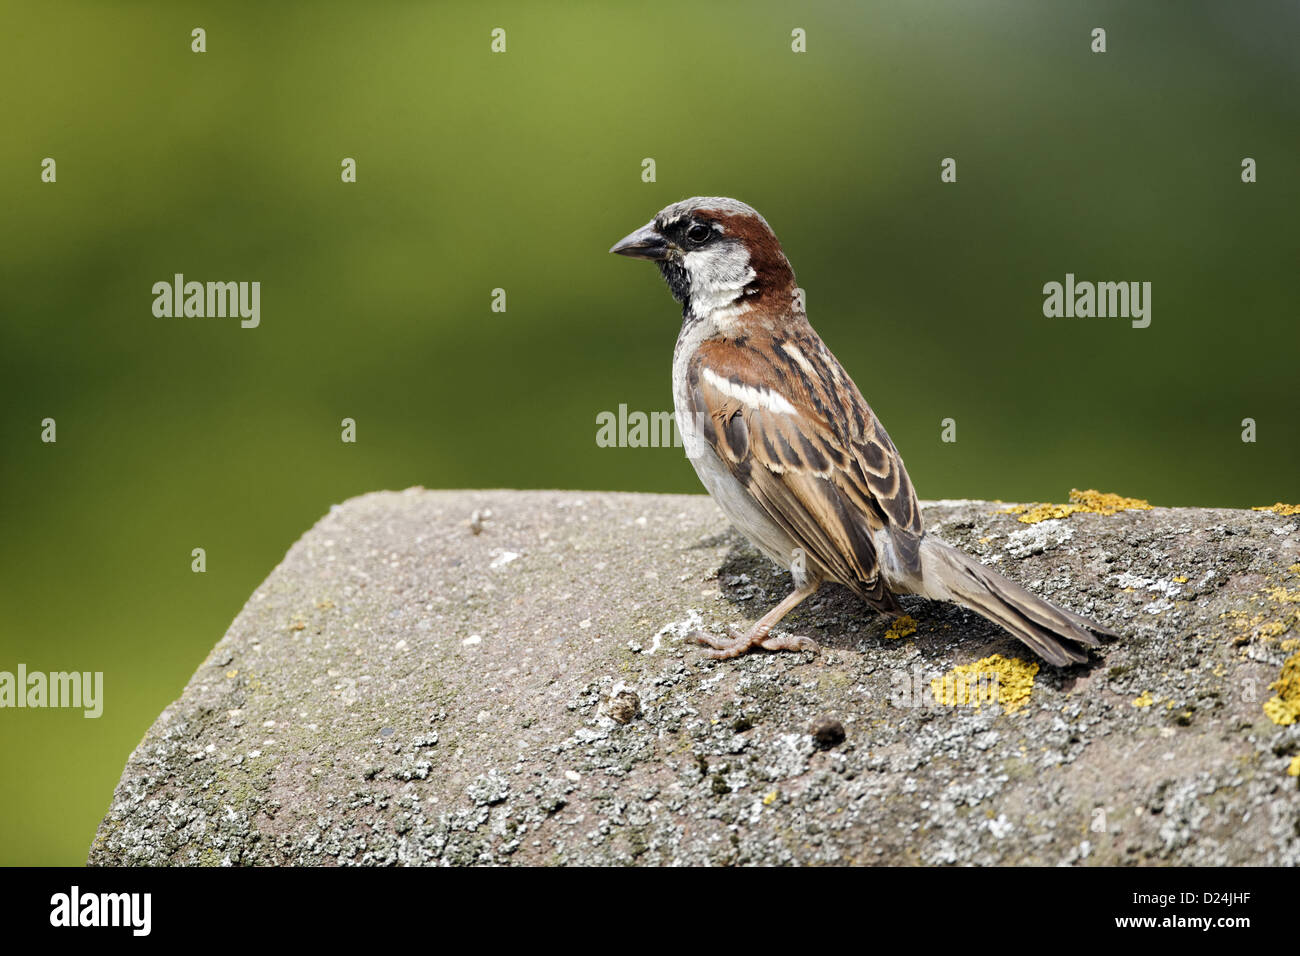 House Sparrow (Passer domesticus) adult male, standing on tiled roof, Staffordshire, England, August Stock Photo